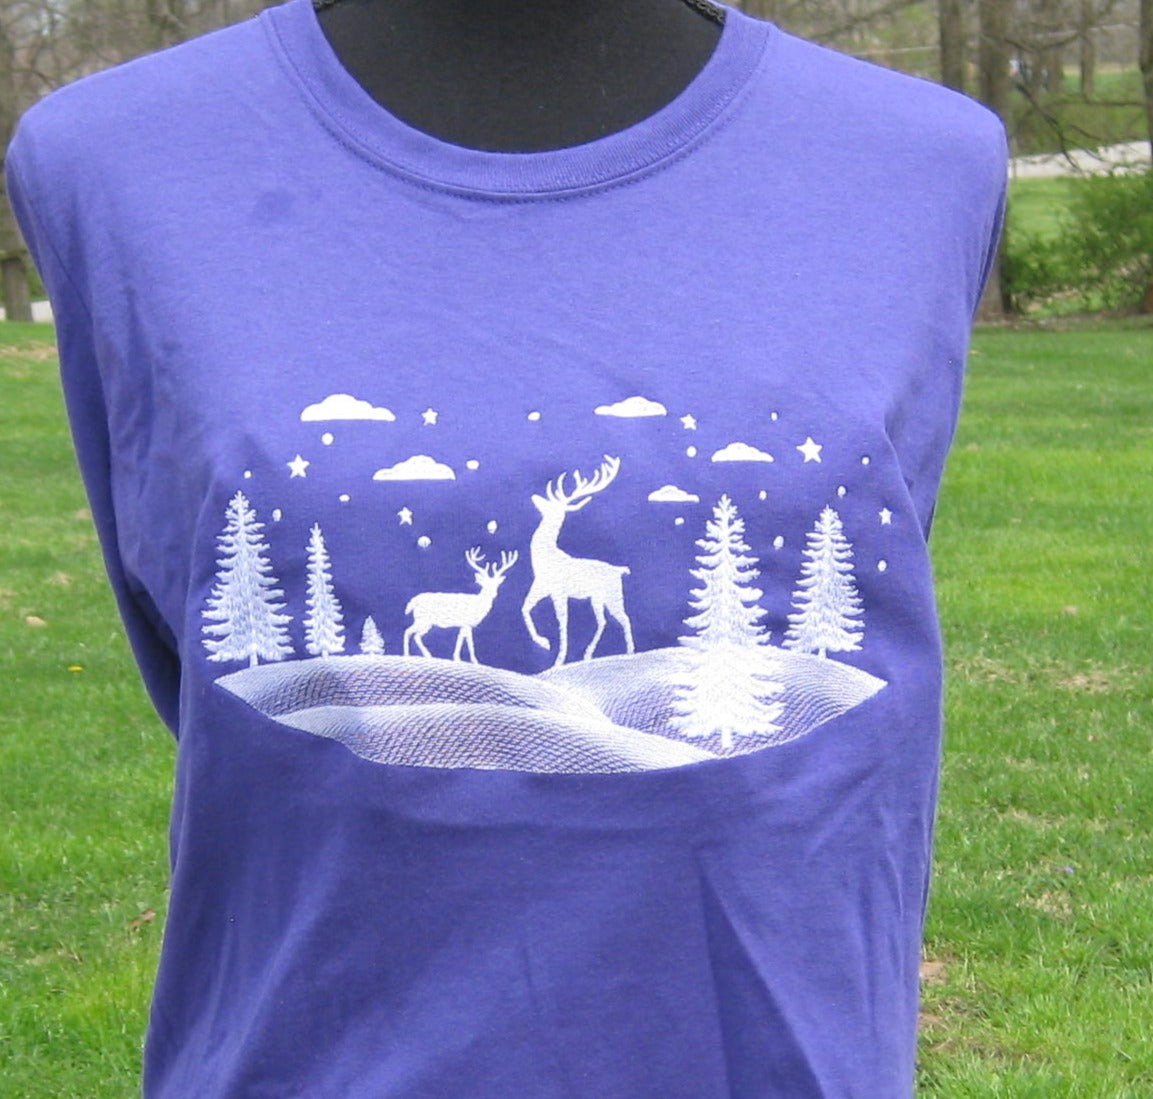 long with Winter – Deer Ties Scene sleeve t-shirt Family Stitched